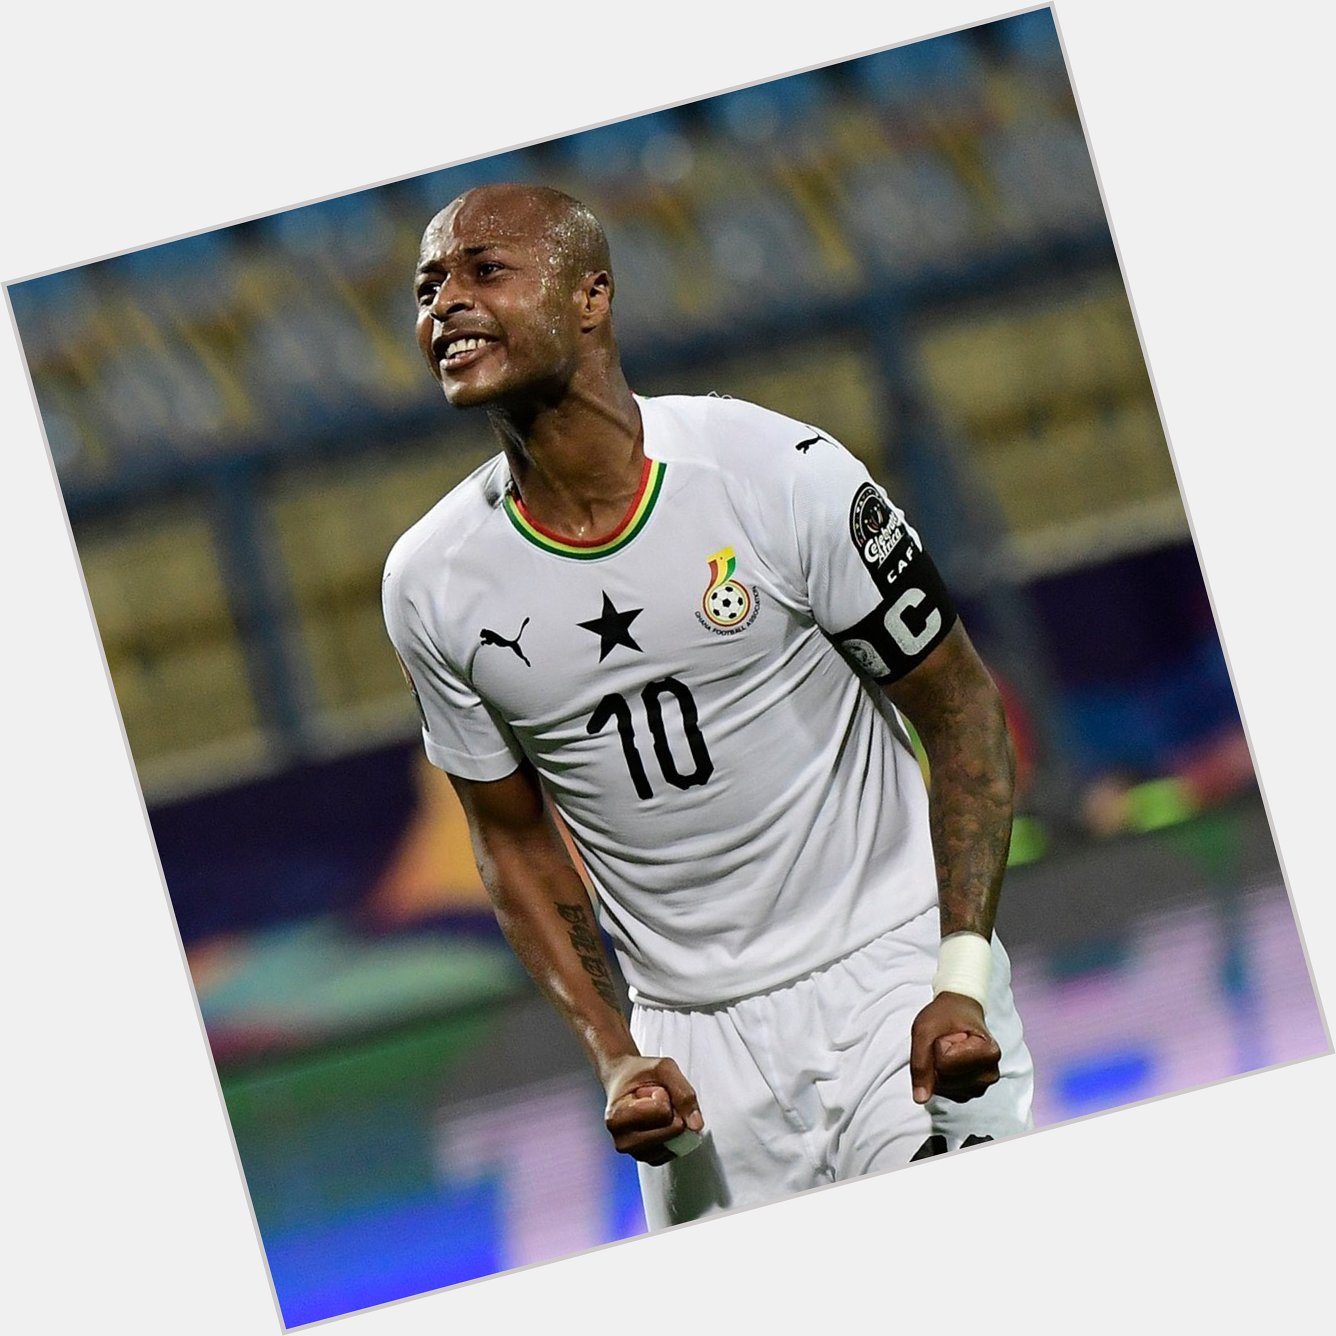 Happy birthday to André Ayew who turns 30 today. 